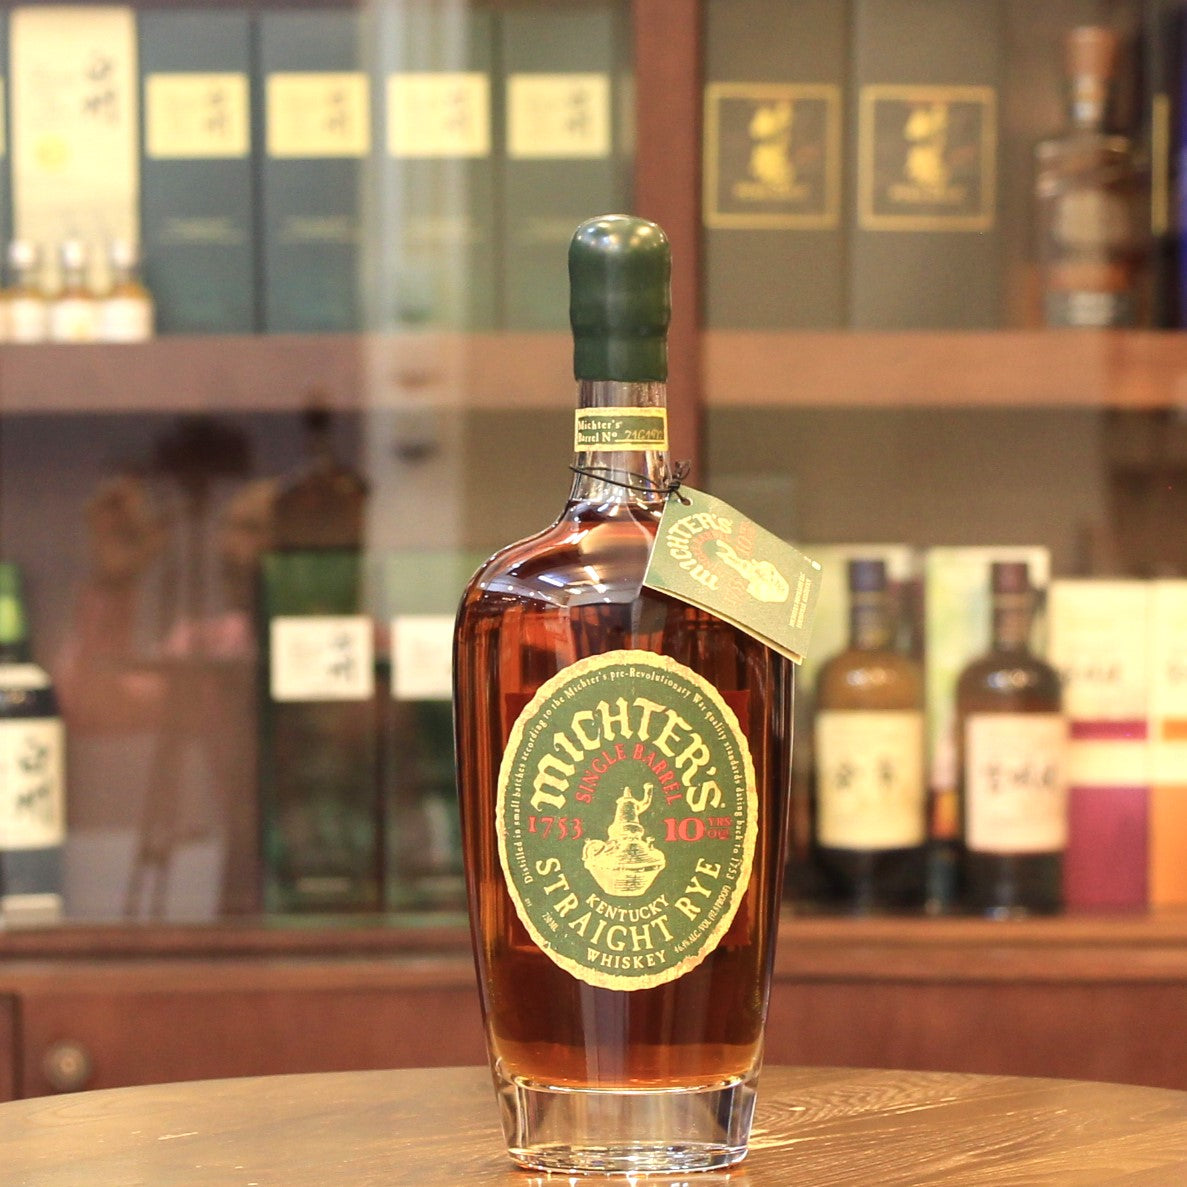 Michter's Single Barrel 10 Years Old Kentucky Straight Rye Whiskey